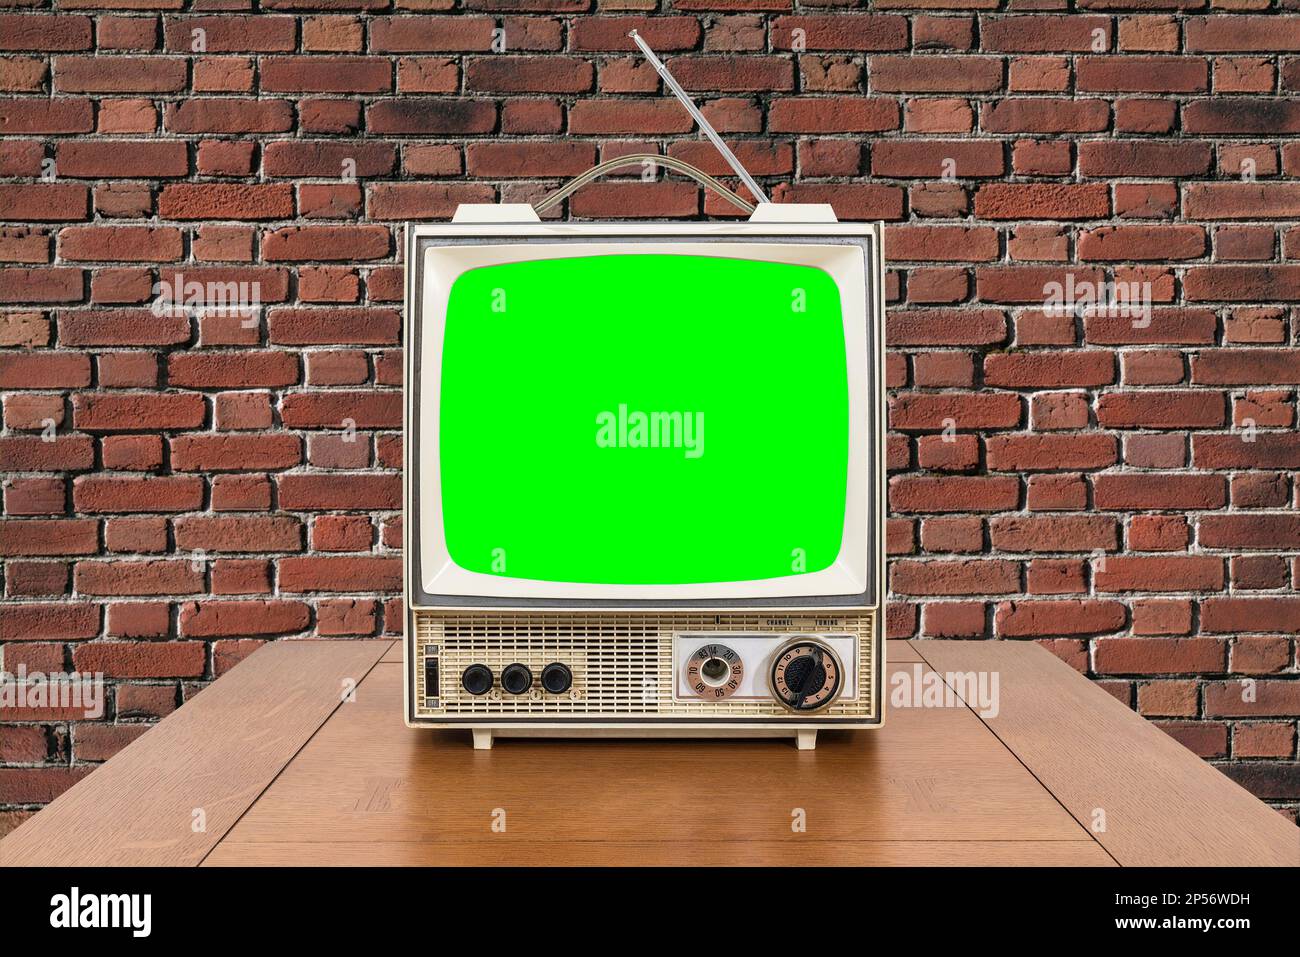 Vntage portable television with wood table, brick wall and chroma key green screen. Stock Photo